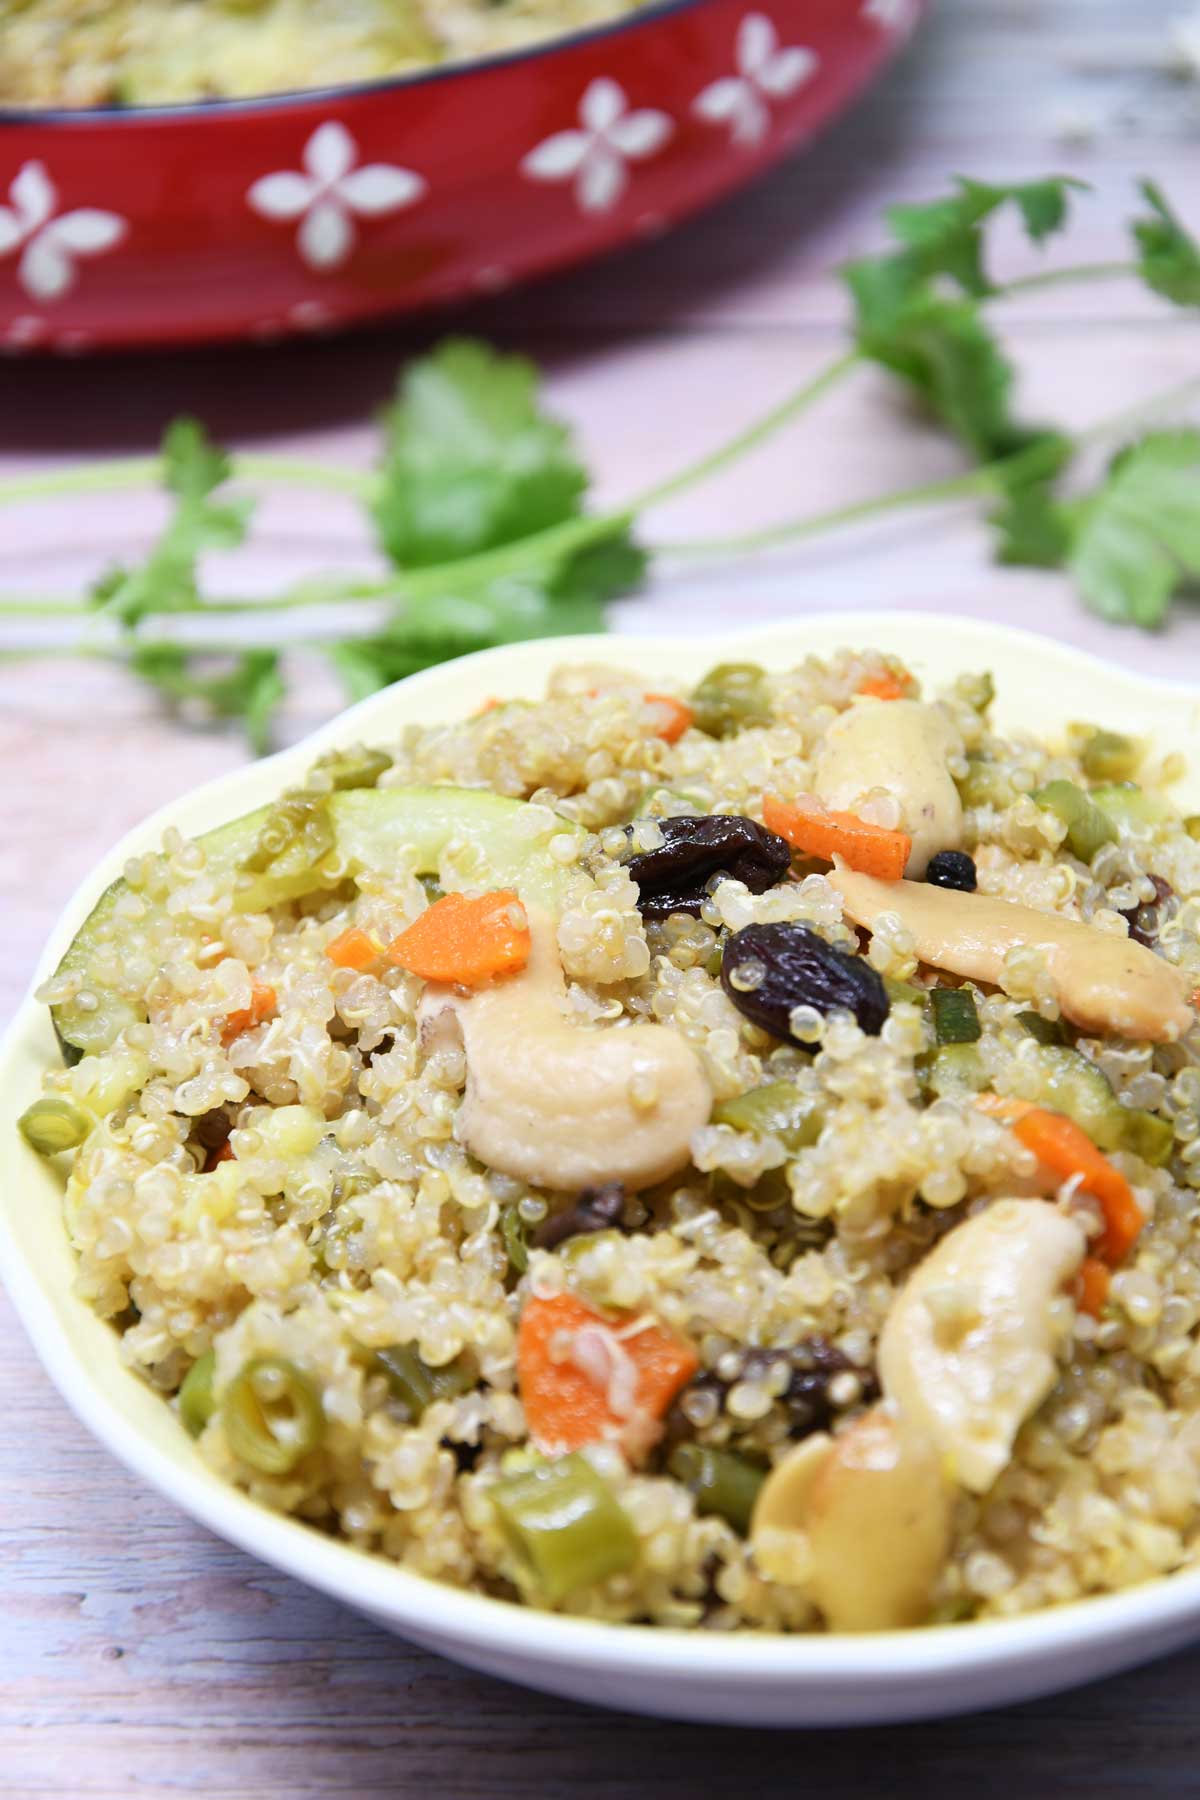 Quinoa pulao served in a bowl.